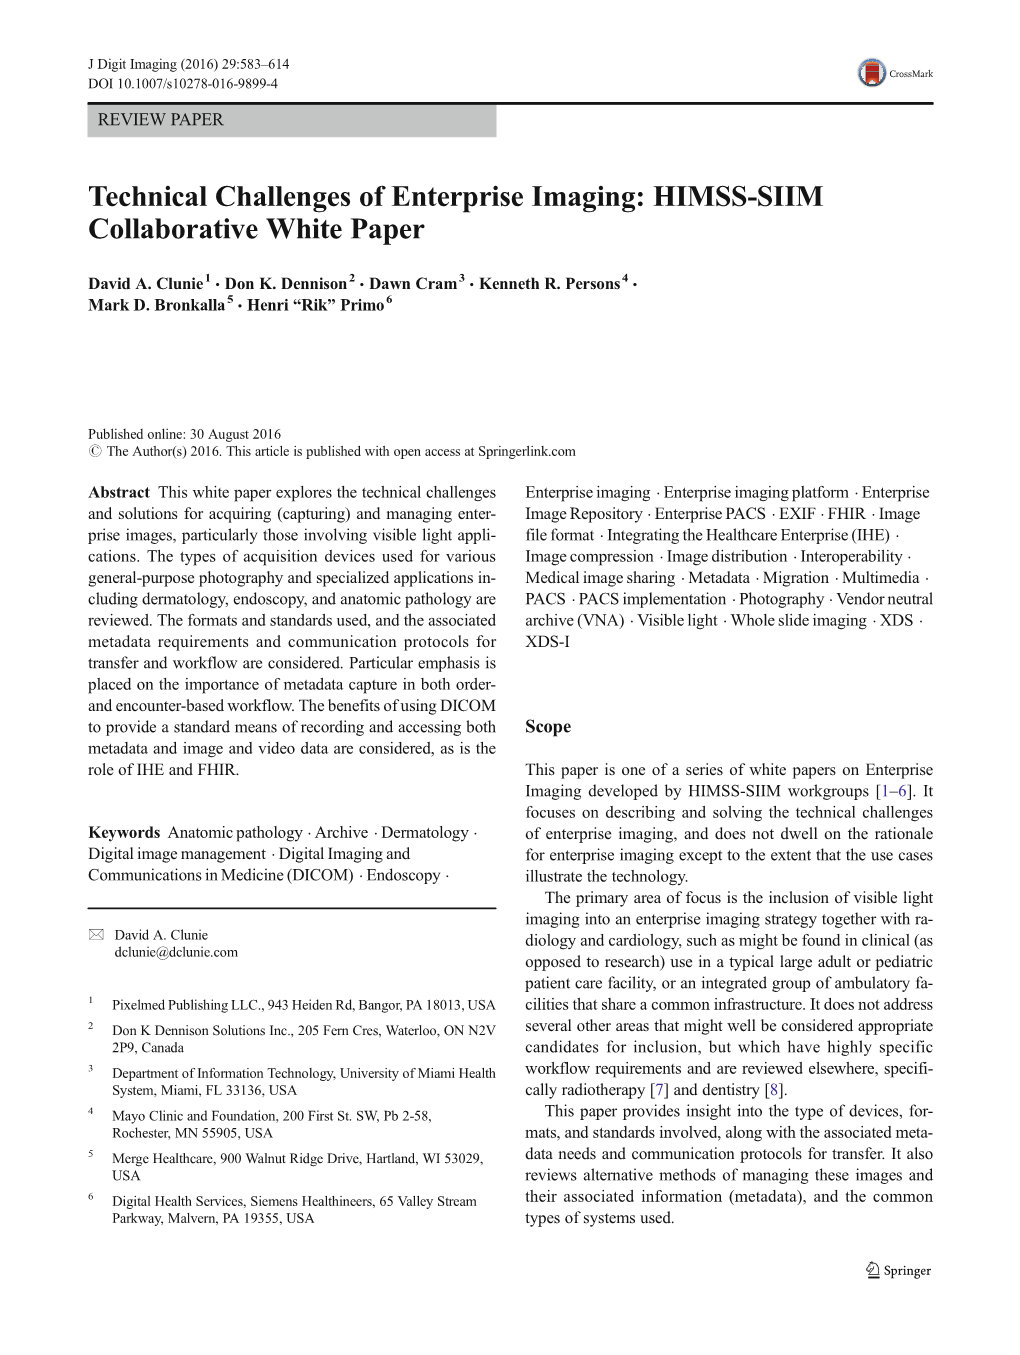 Technical Challenges of Enterprise Imaging: HIMSS-SIIM Collaborative White Paper